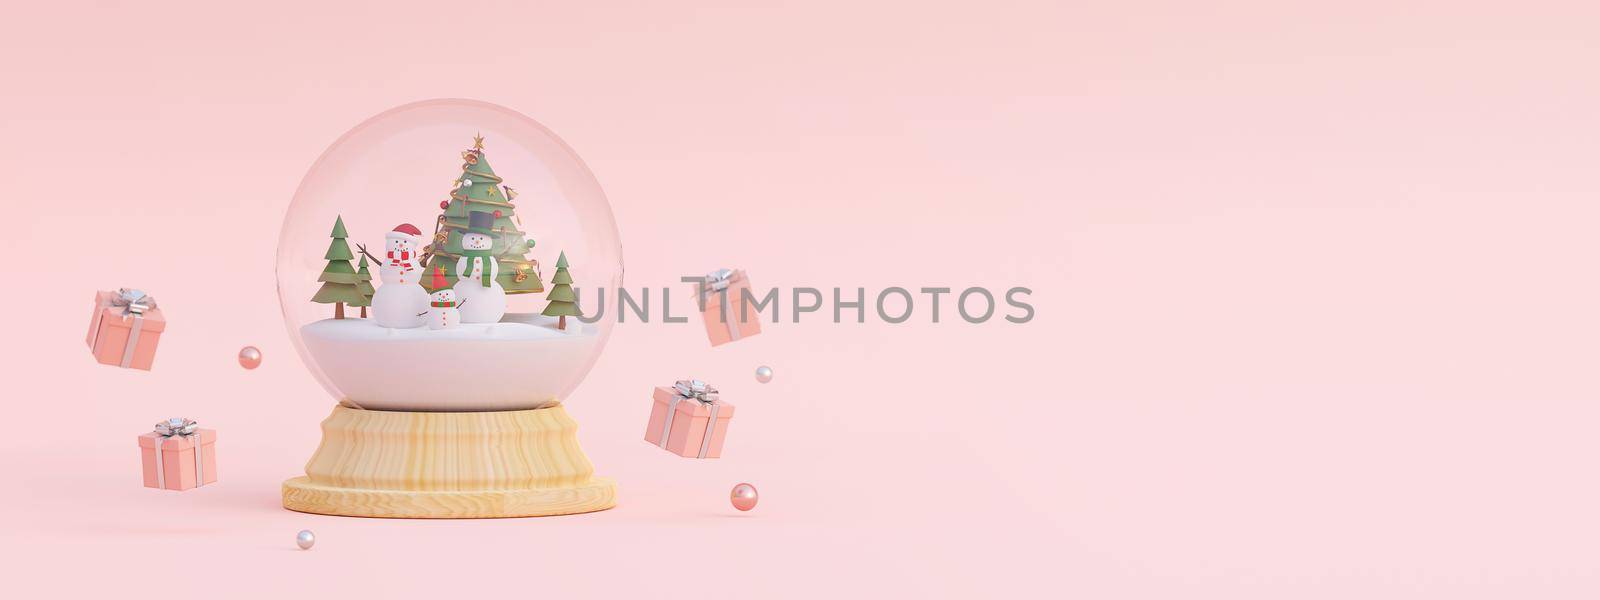 Merry Christmas and Happy New Year, Scene of Christmas gifts and Snowman with Christmas tree in a snow globe, 3d rendering by nutzchotwarut